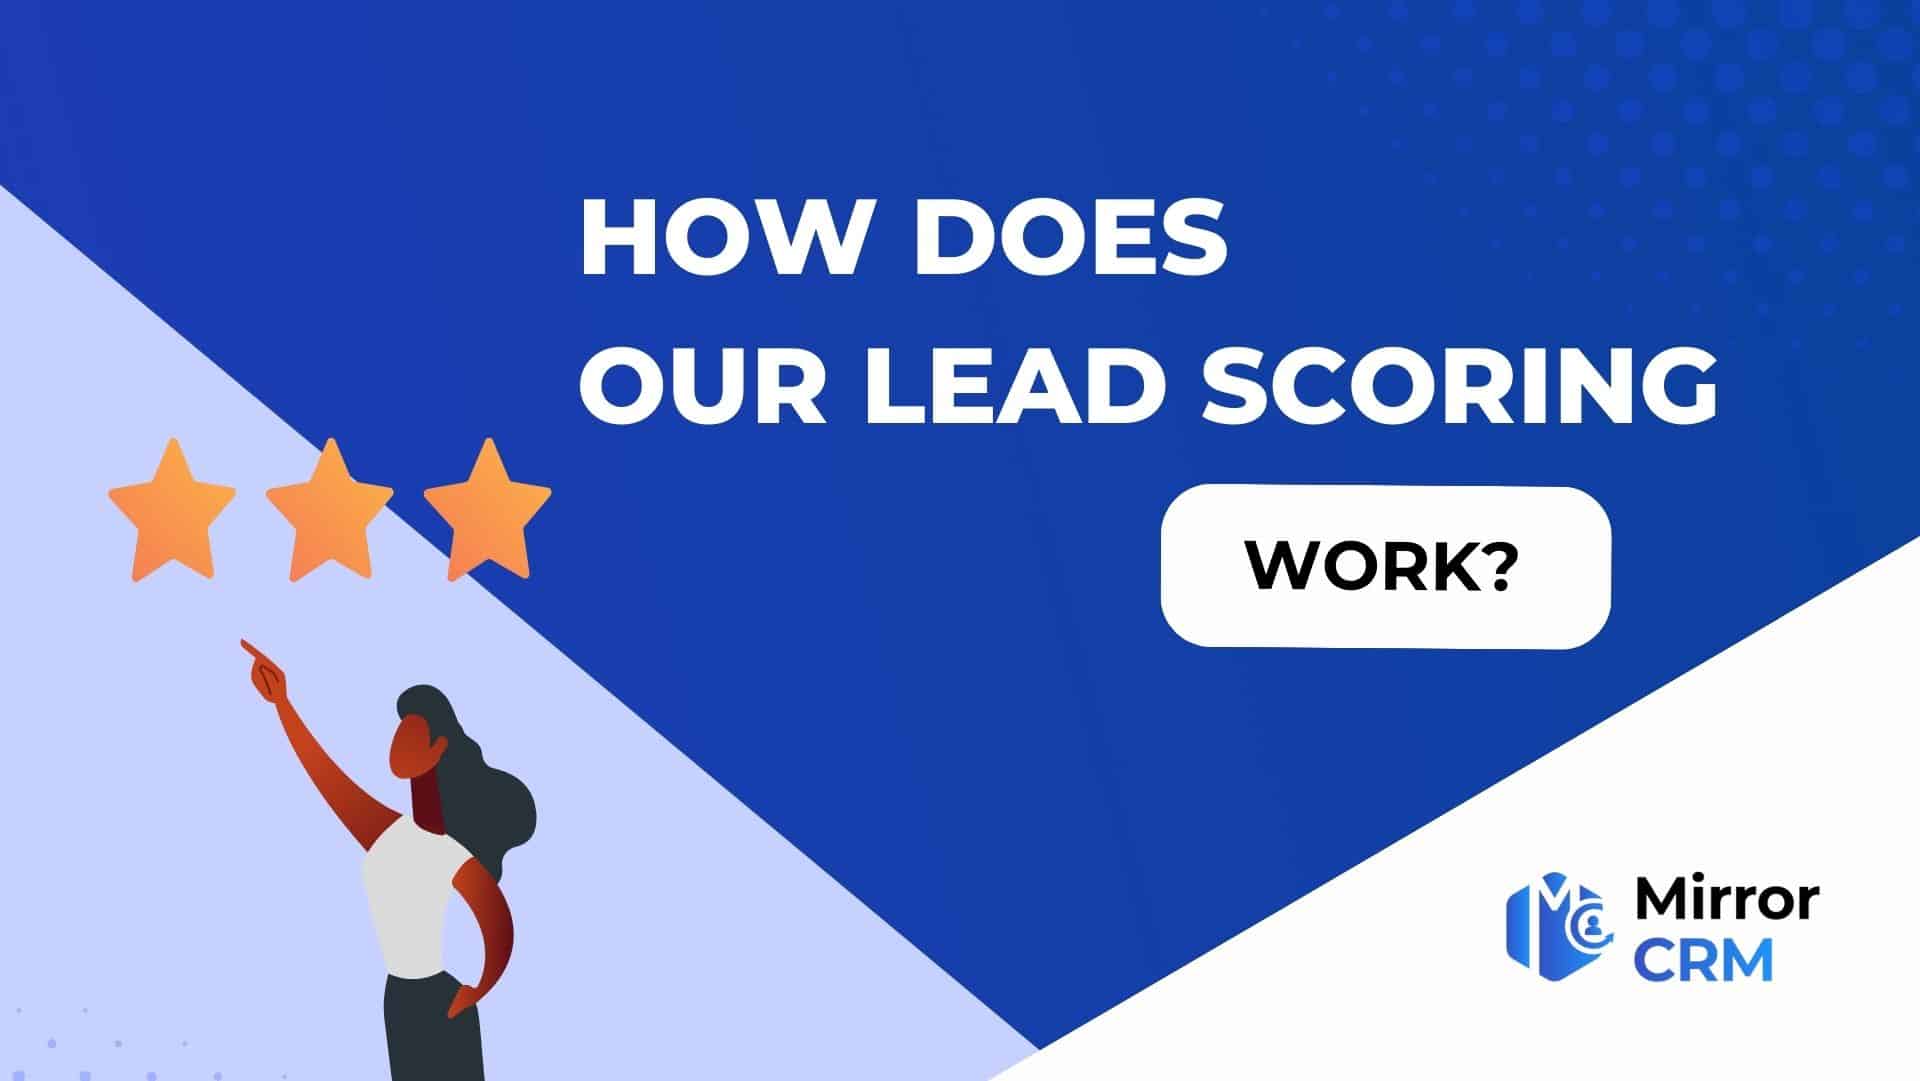 MirrorCRM: How does our lead scoring work?